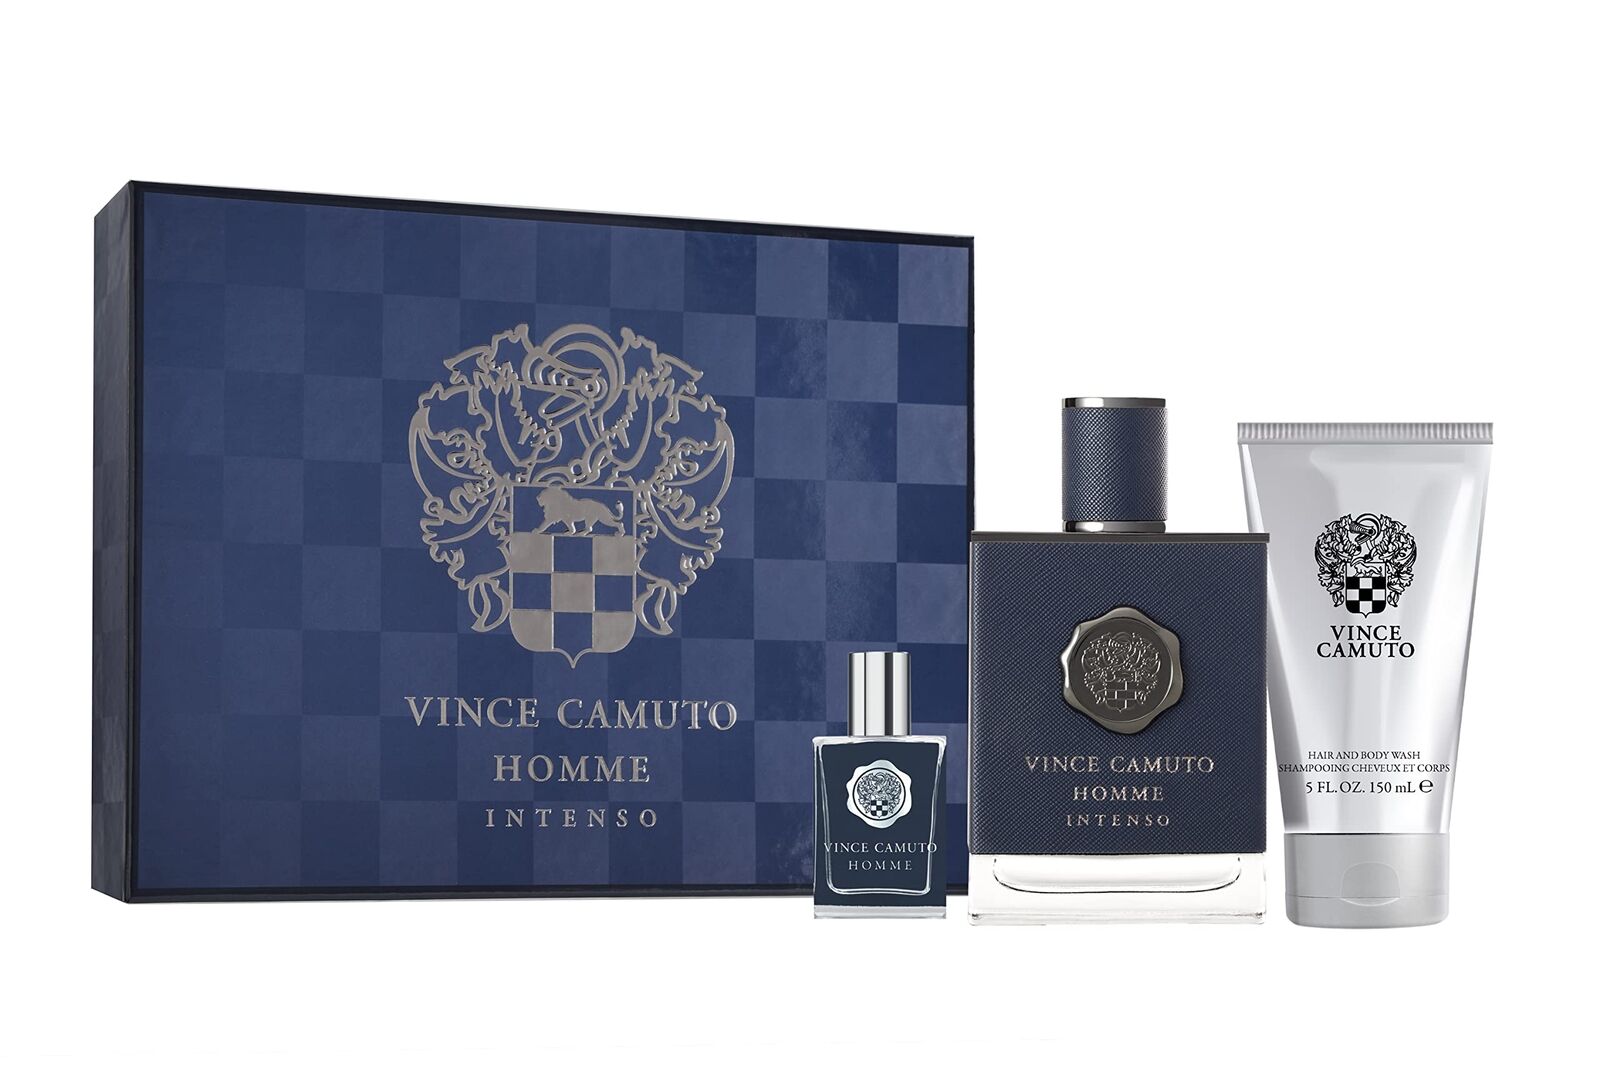 Vince Camuto Homme Intenso Gift Set for Men 3 Piece